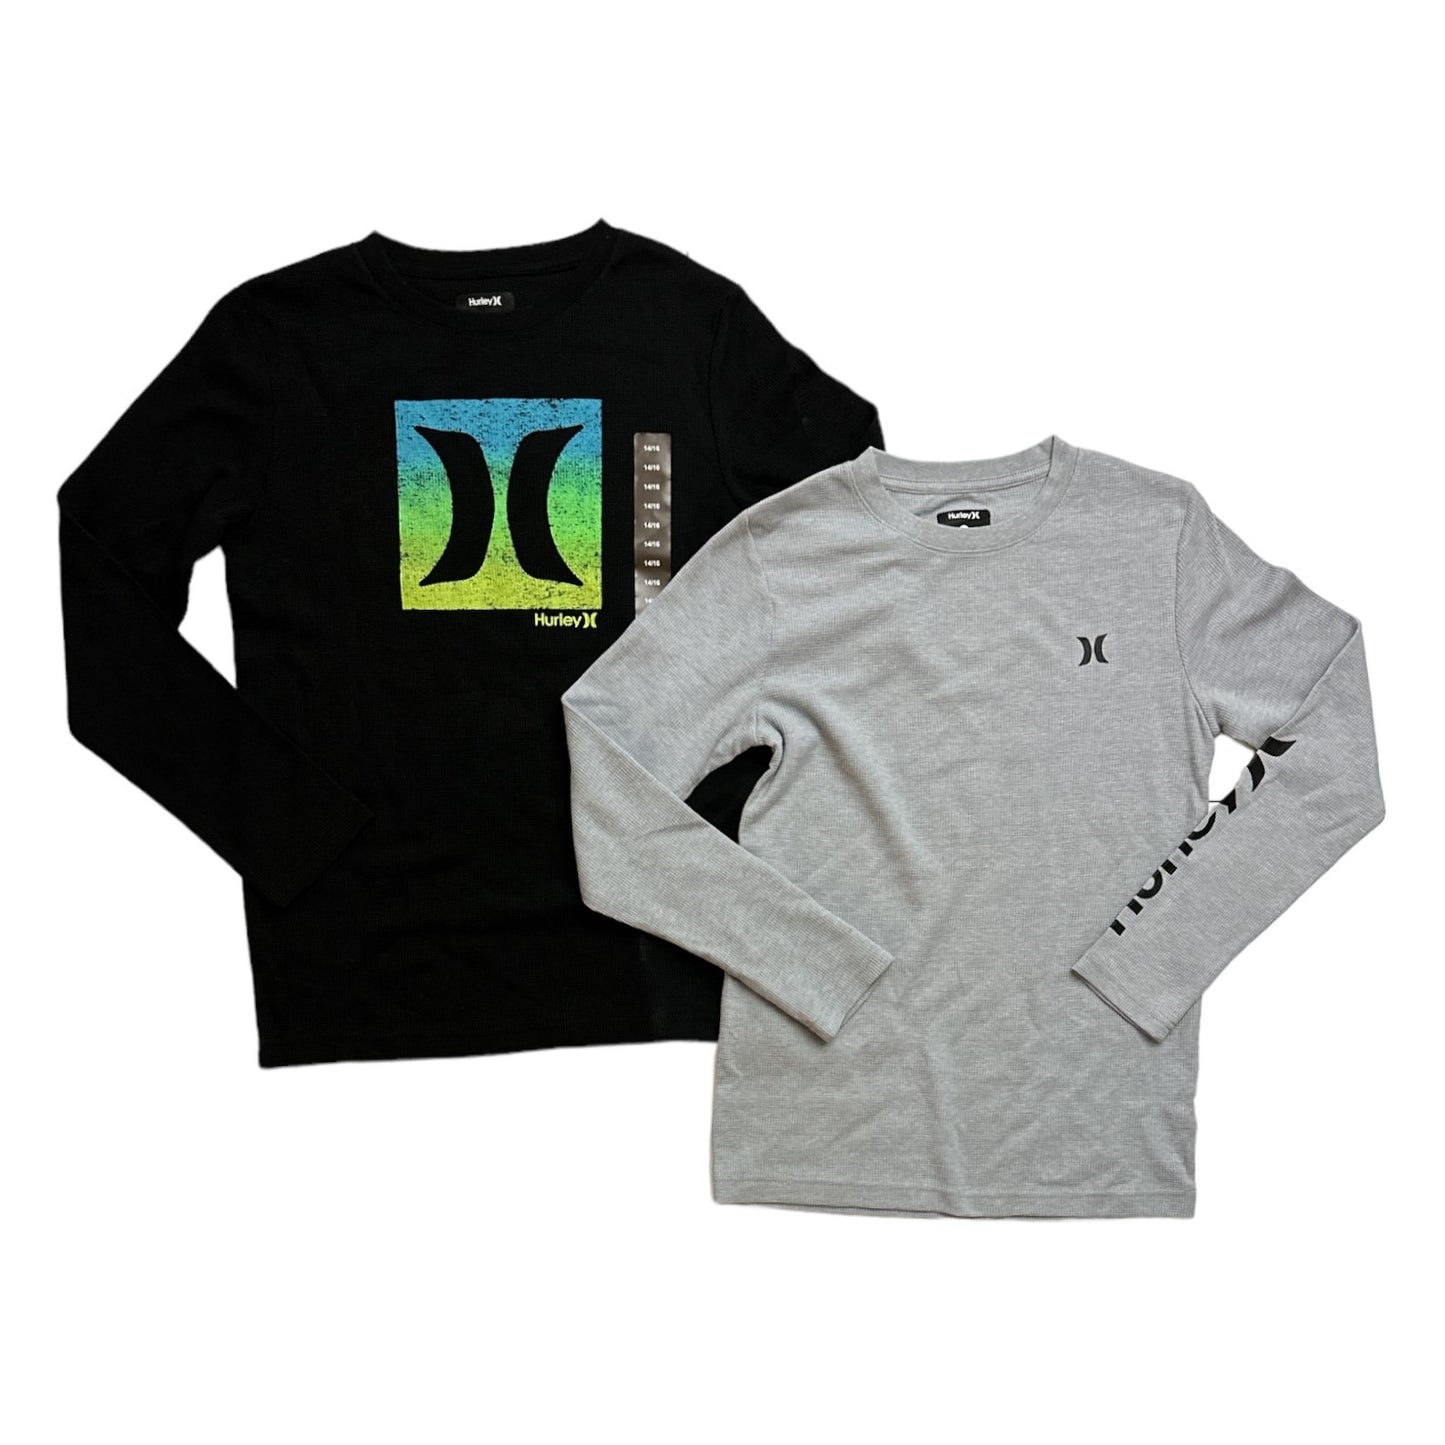 Hurley Boy's 2-Pack Thermal Crew Neck Long Sleeve T-Shirts